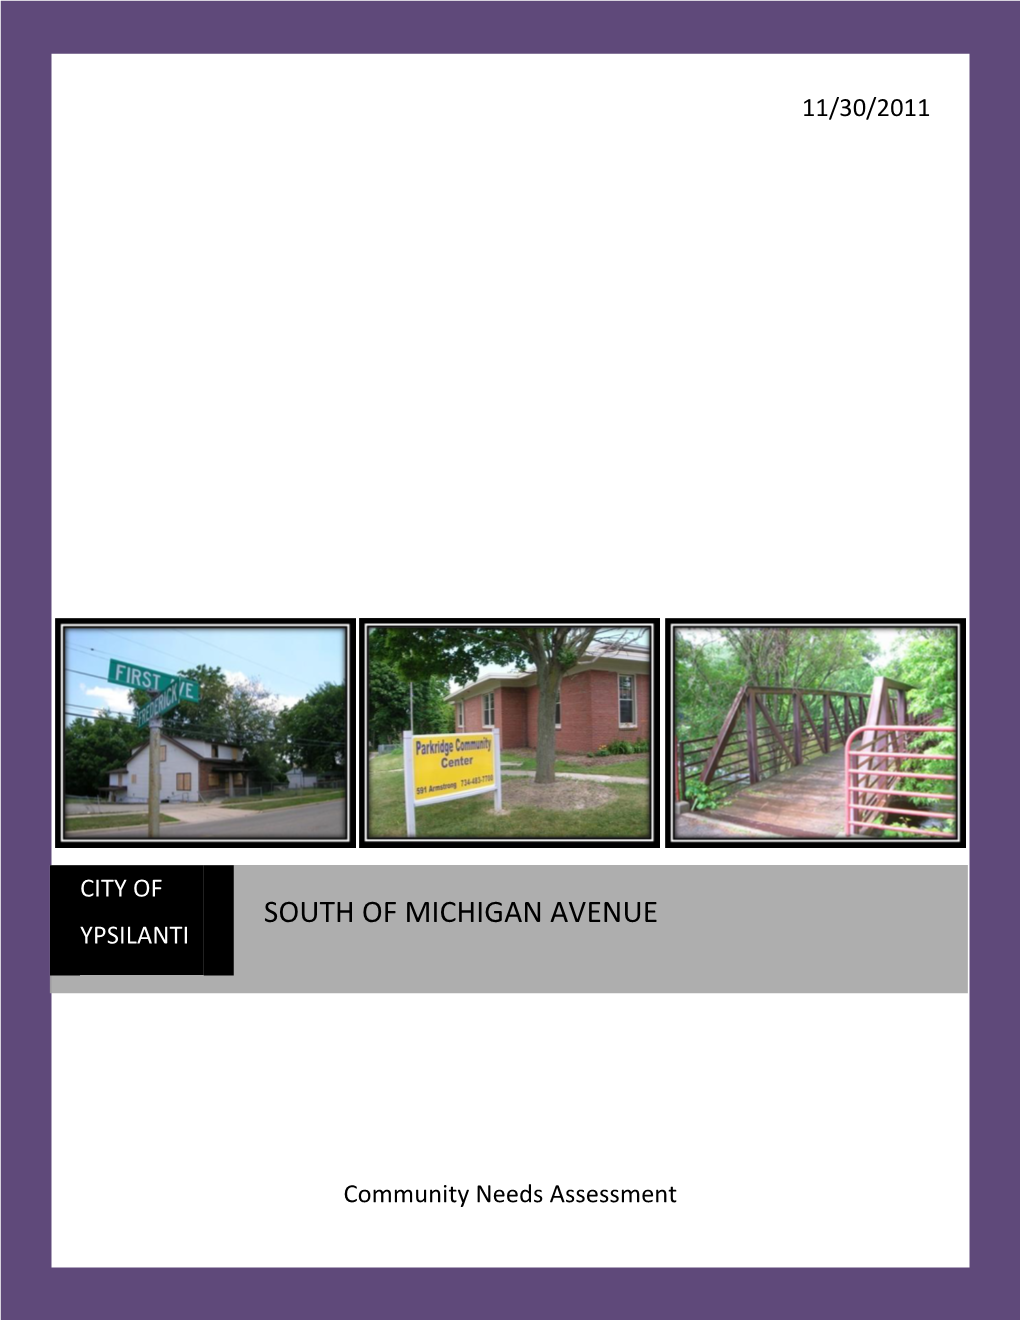 South of Michigan Avenue Community Needs Assessment